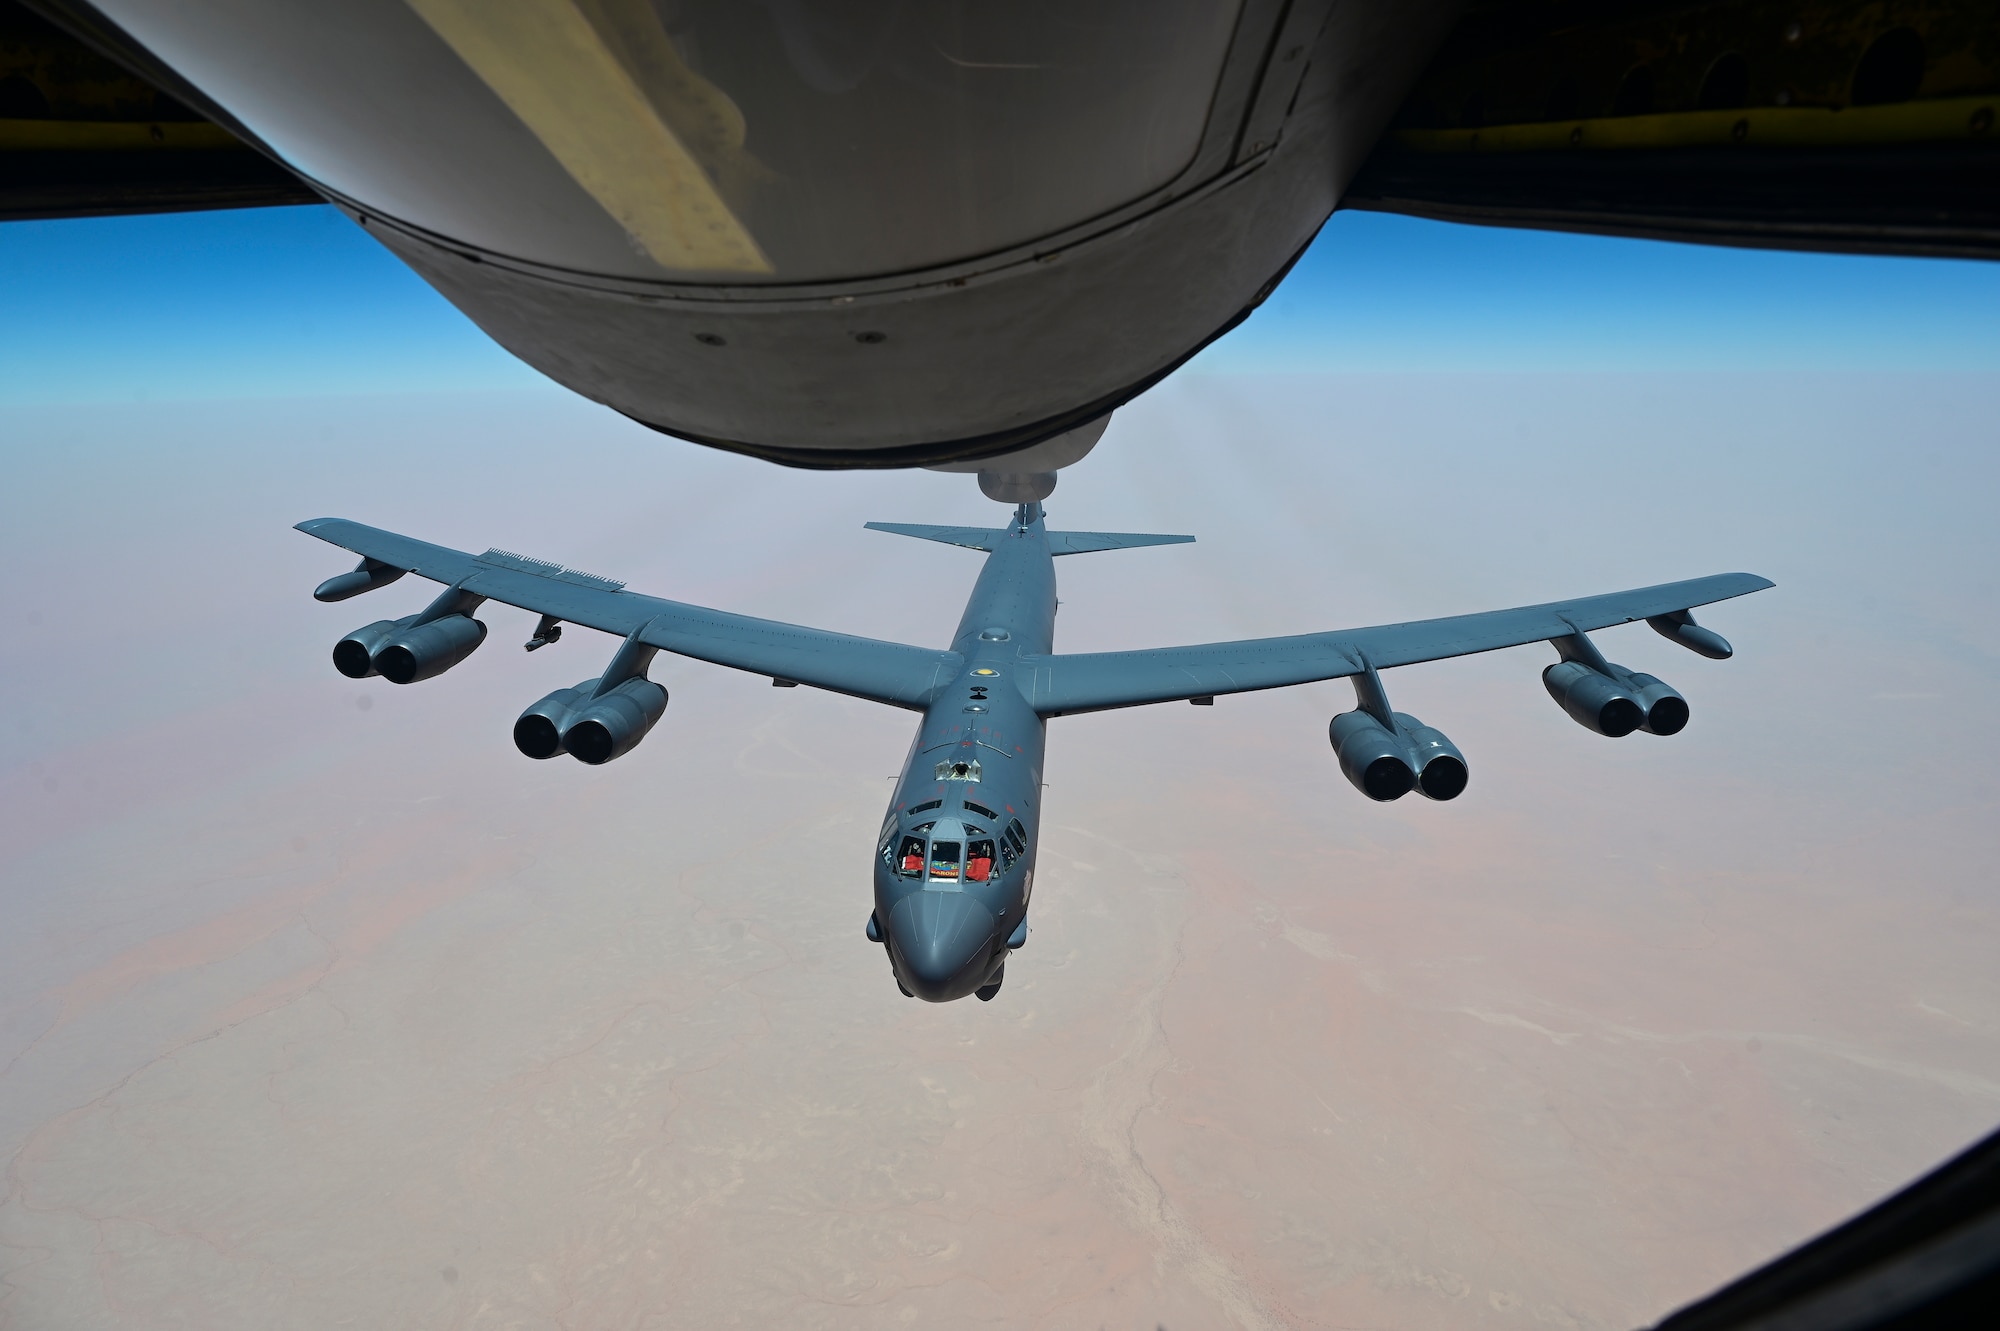 U.S. Air Force B-52 Stratofortress, assigned to the 5th Bomb Wing is refueled by a KC-135 Stratotanker assigned to the 350th Expeditionary Air Refueling Squadron over the U.S. Central Command area of responsibility June 8, 2022. The B-52 conducted a presence patrol mission to demonstrate the U.S.-led coalition commitment to promoting reginal stability. (U.S. Air Force photo by Staff Sgt. Ashley Sokolov)